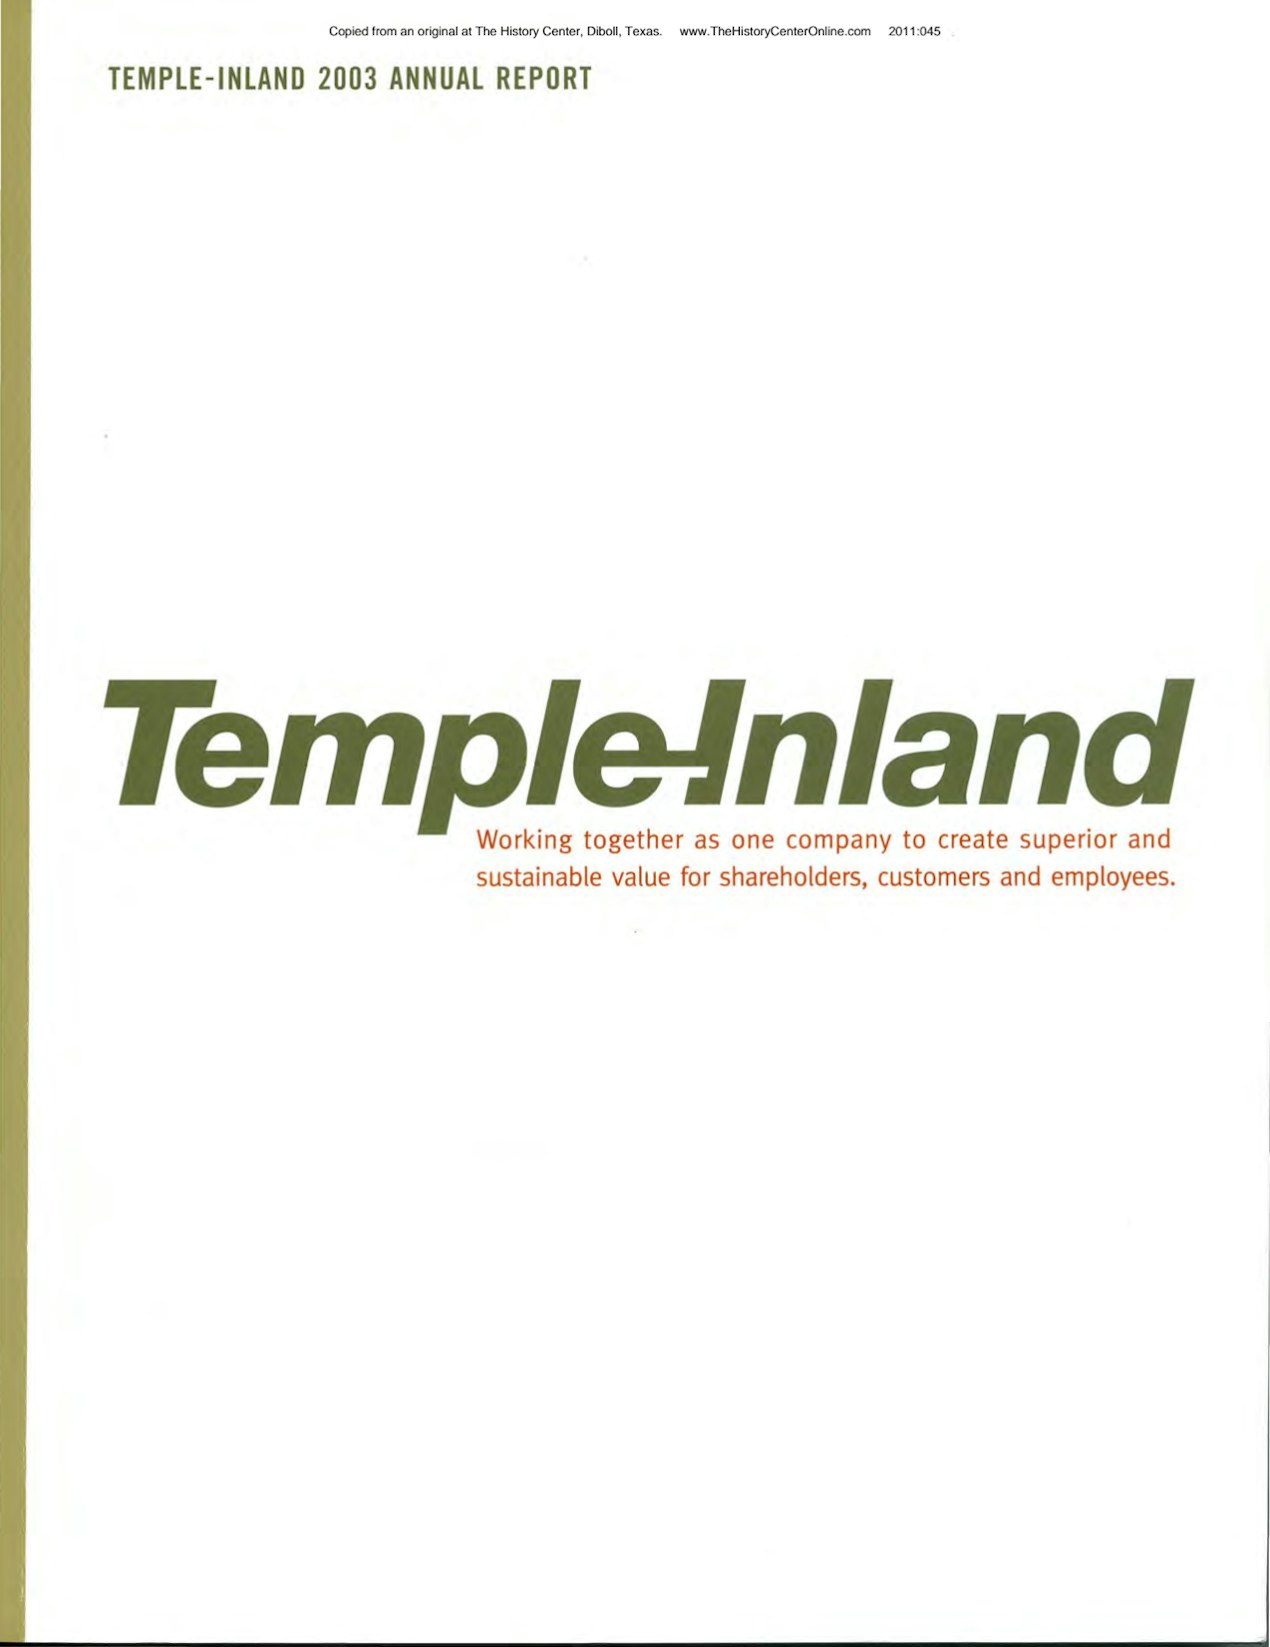 2003 Temple-Inland Annual Report